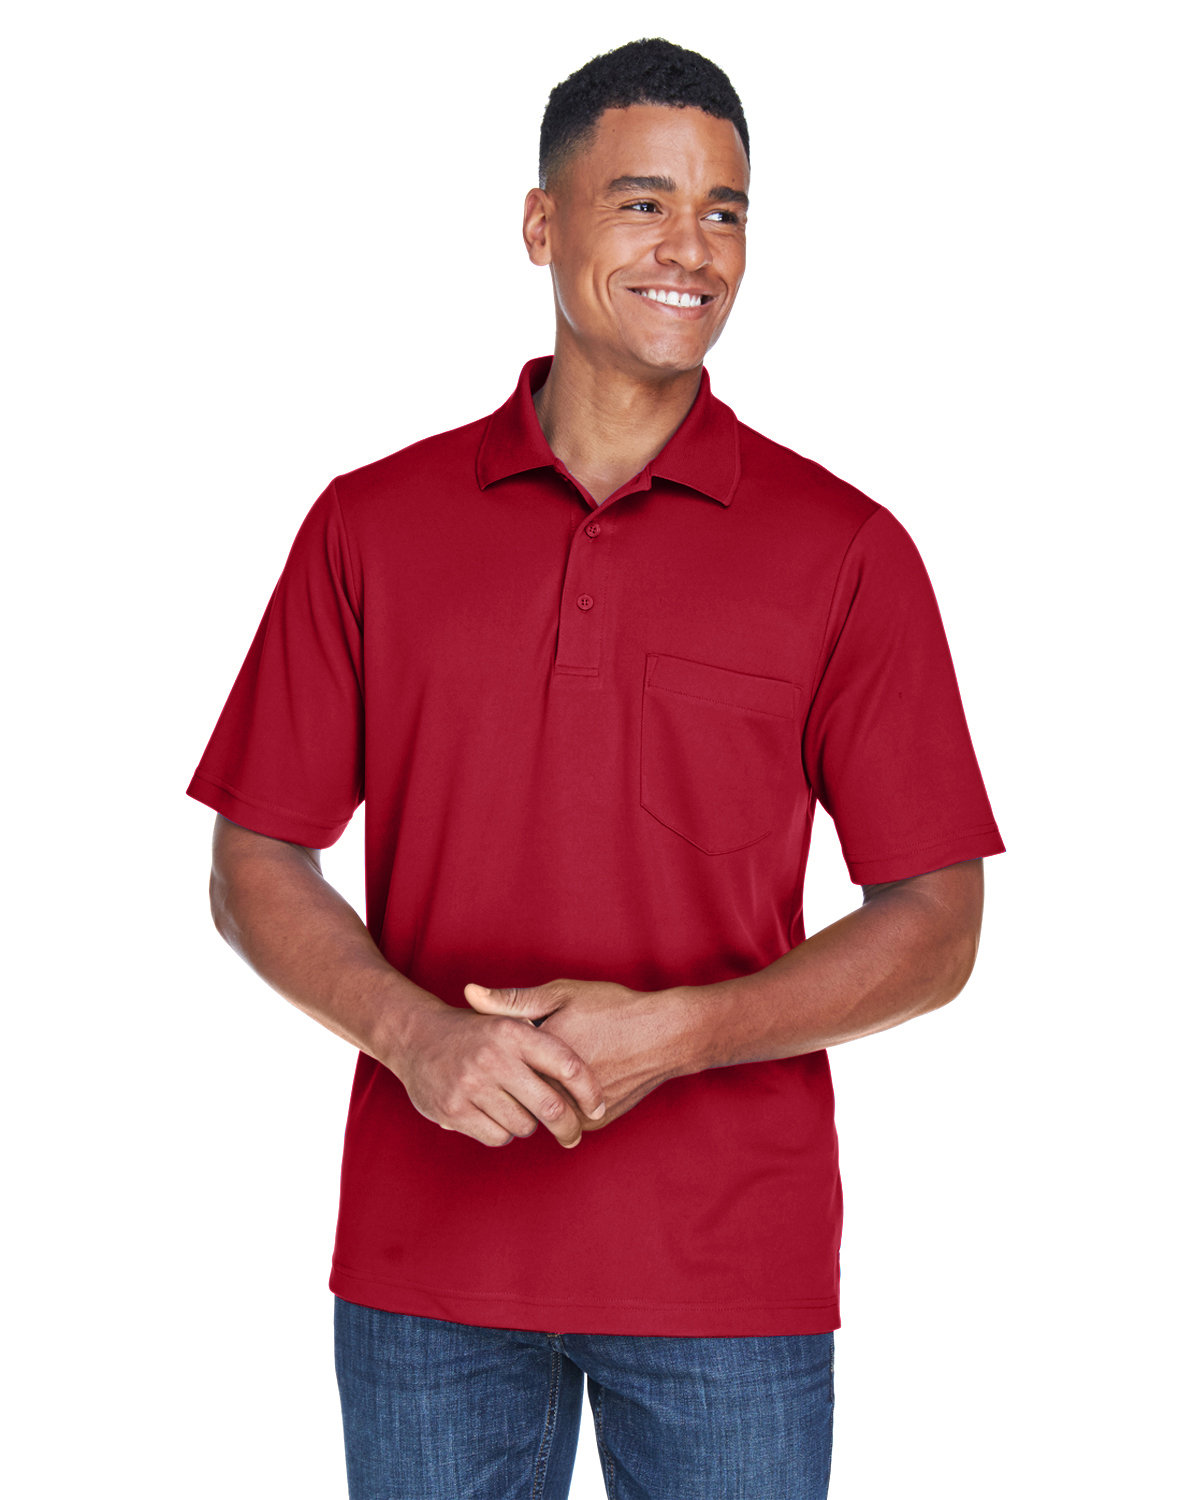 Core 365 Men's Origin Performance Piqué Polo with Pocket CLASSIC RED 